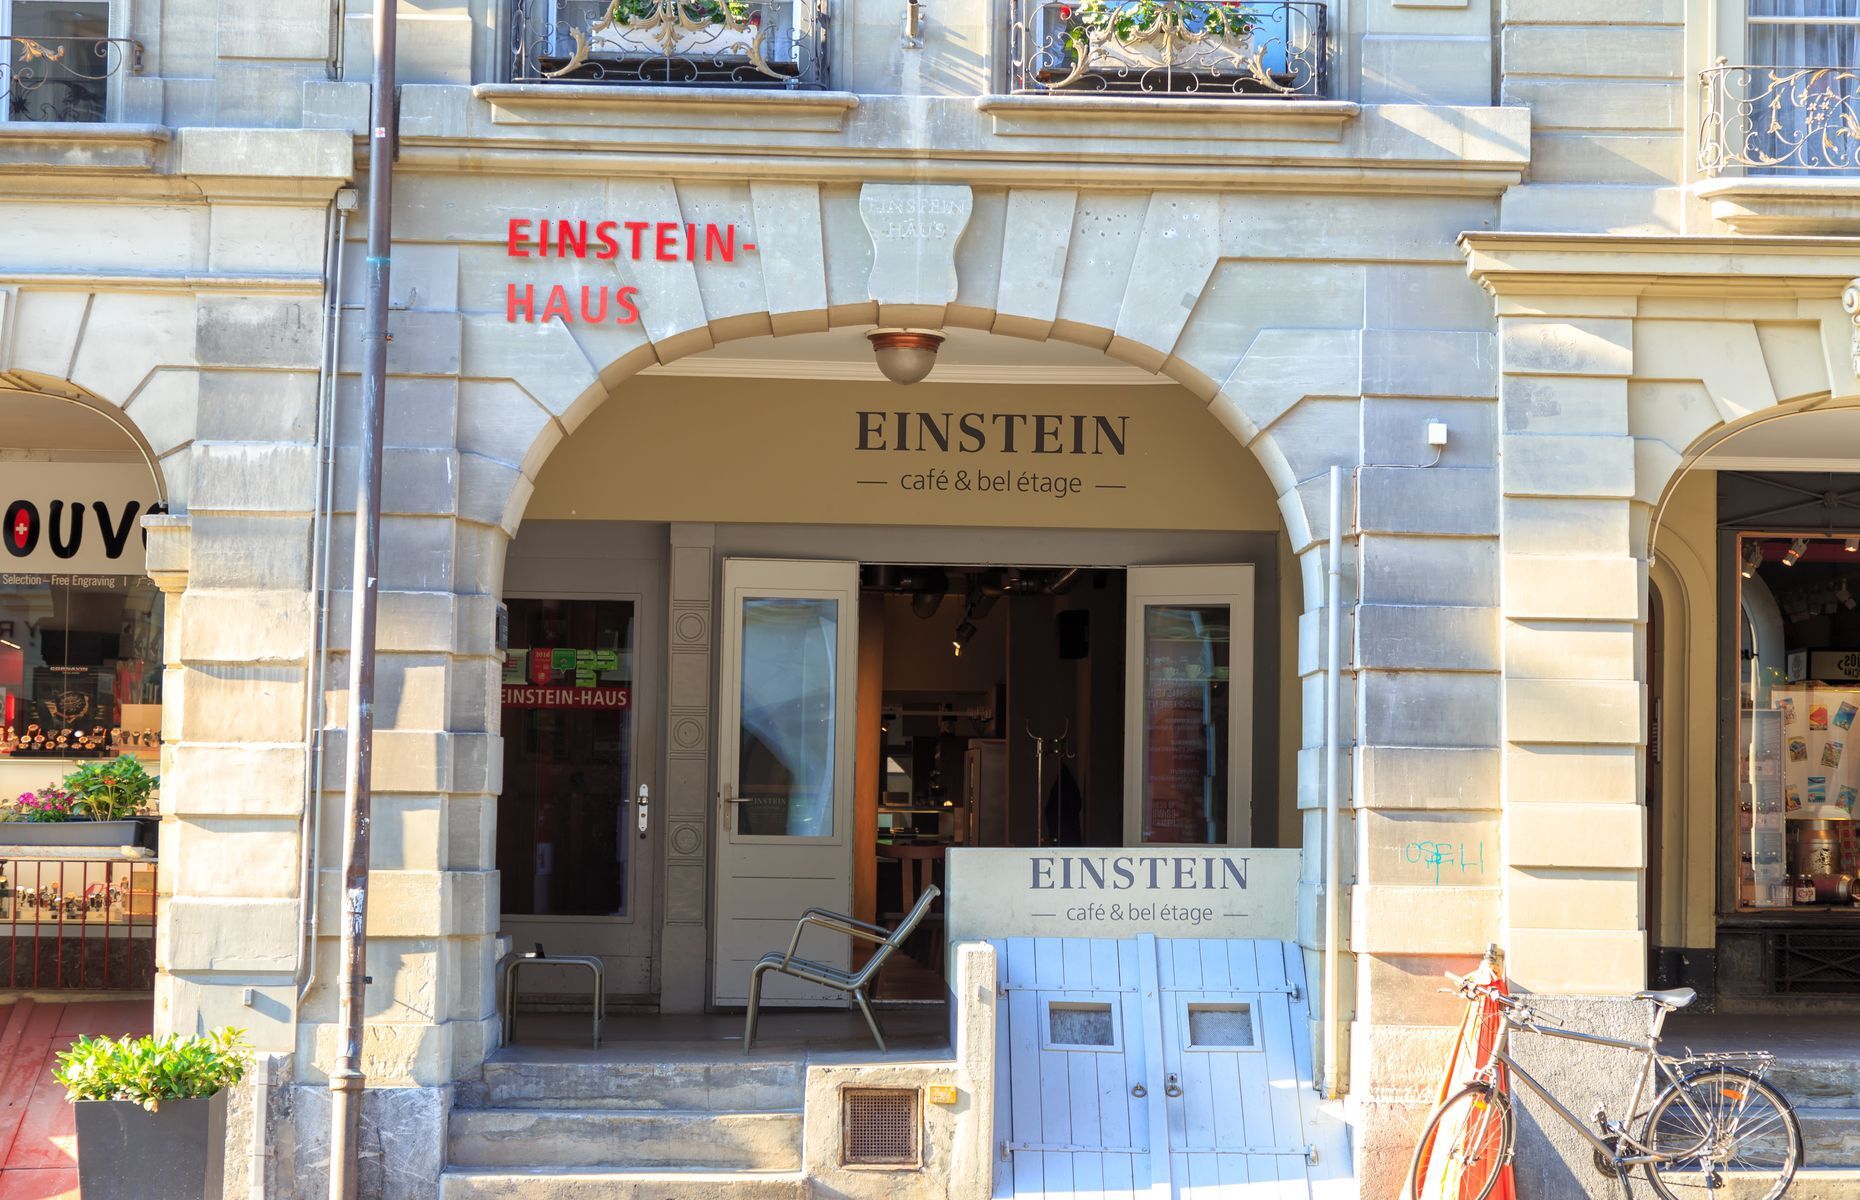 <p>In Bern, tourists can visit the <a href="https://www.bern.com/en/detail/einstein-house" title="https://www.bern.com/en/detail/einstein-house">Einstein House</a>, the spot where Albert Einstein lived from 1903 to 1905 and the location where he developed his Theory of Relativity. <a href="https://www.reddit.com/r/askswitzerland/comments/yu09vd/i_will_be_in_bern_over_the_next_weekend_is_there/" title="https://www.reddit.com/r/askswitzerland/comments/yu09vd/i_will_be_in_bern_over_the_next_weekend_is_there/">One Reddit user</a> said Einstein’s apartment is “not worth the visit” because of how expensive and small it is, while on Google, one reviewer gave it two stars and said it’s “not really worth a visit since they do not have a lot of items on display.” </p>